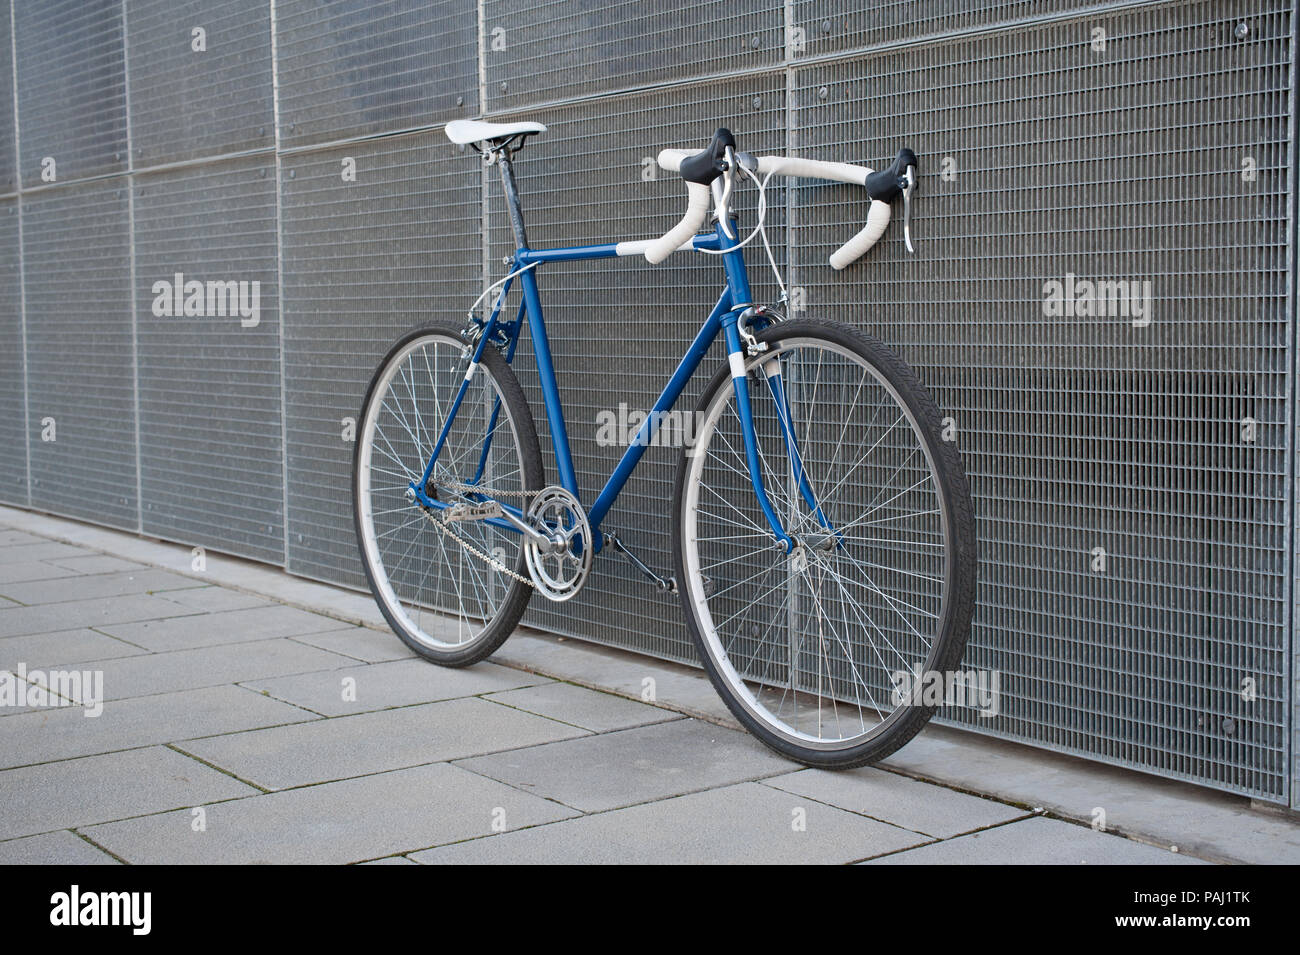 Vintage blue city, road bicycle with white details. Stock Photo